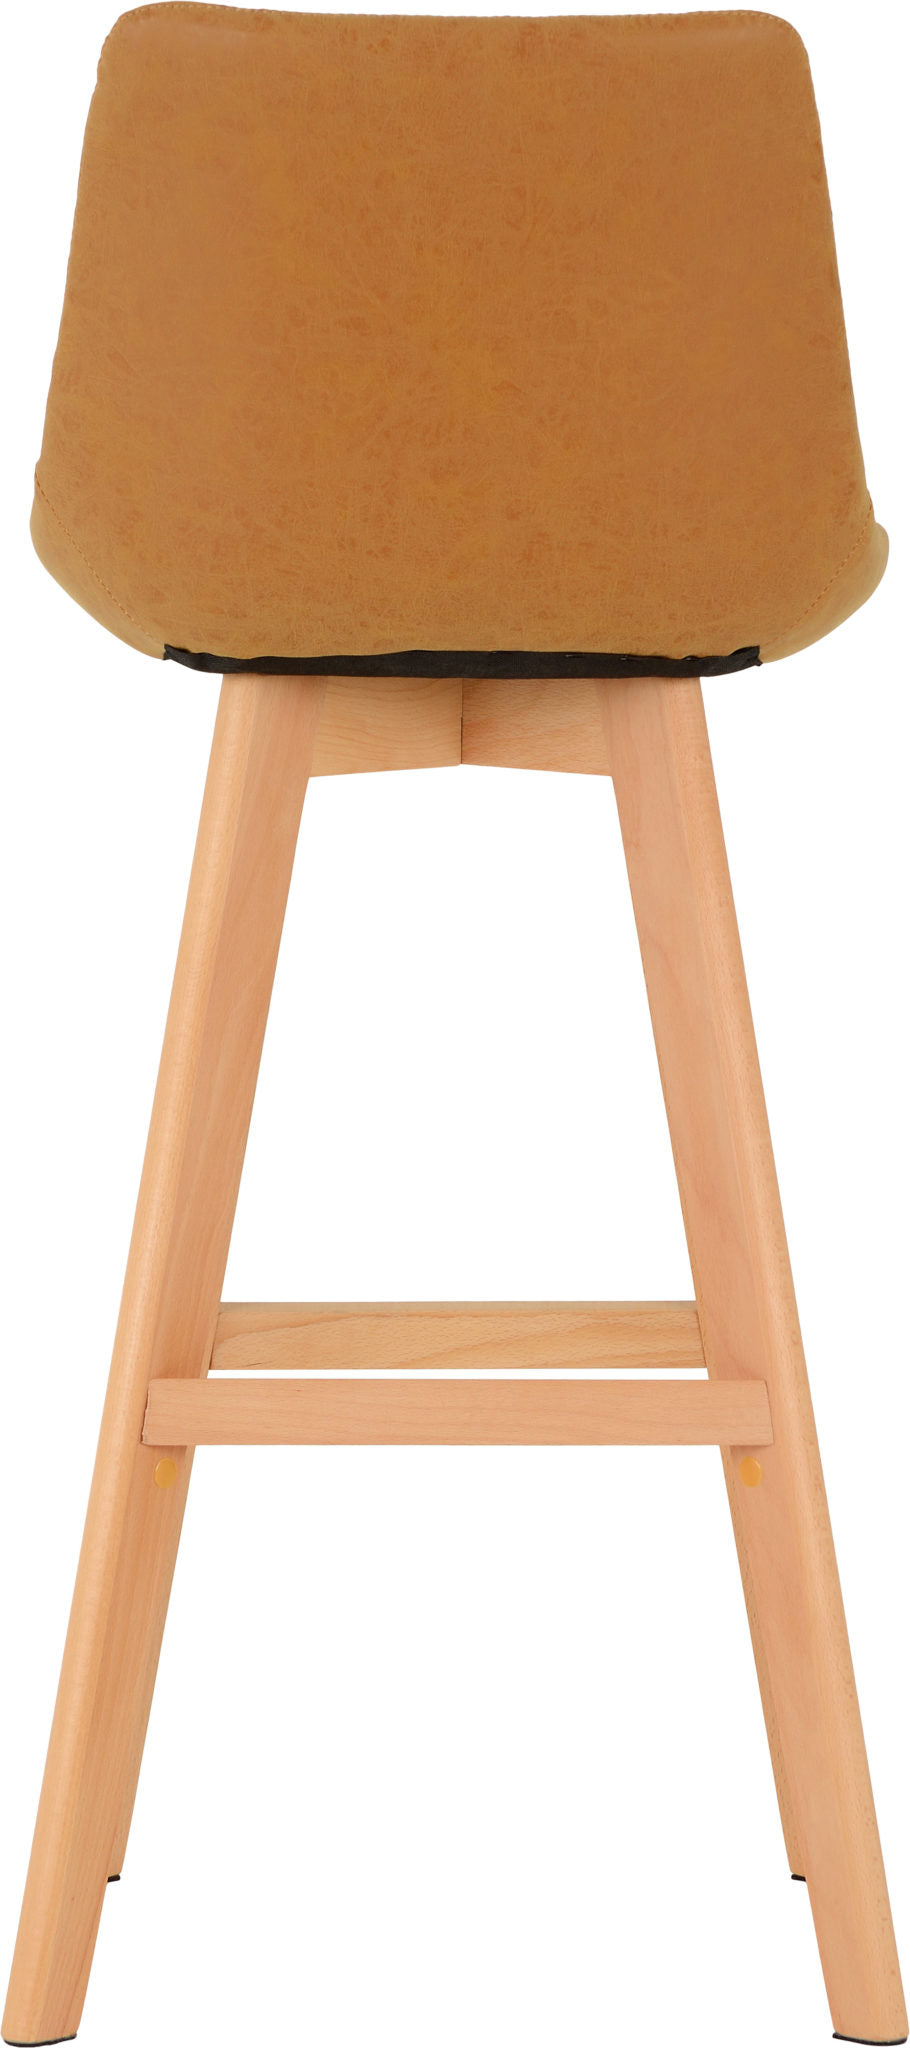 Brisbane Bar Chair Mustard Faux Leather- The Right Buy Store